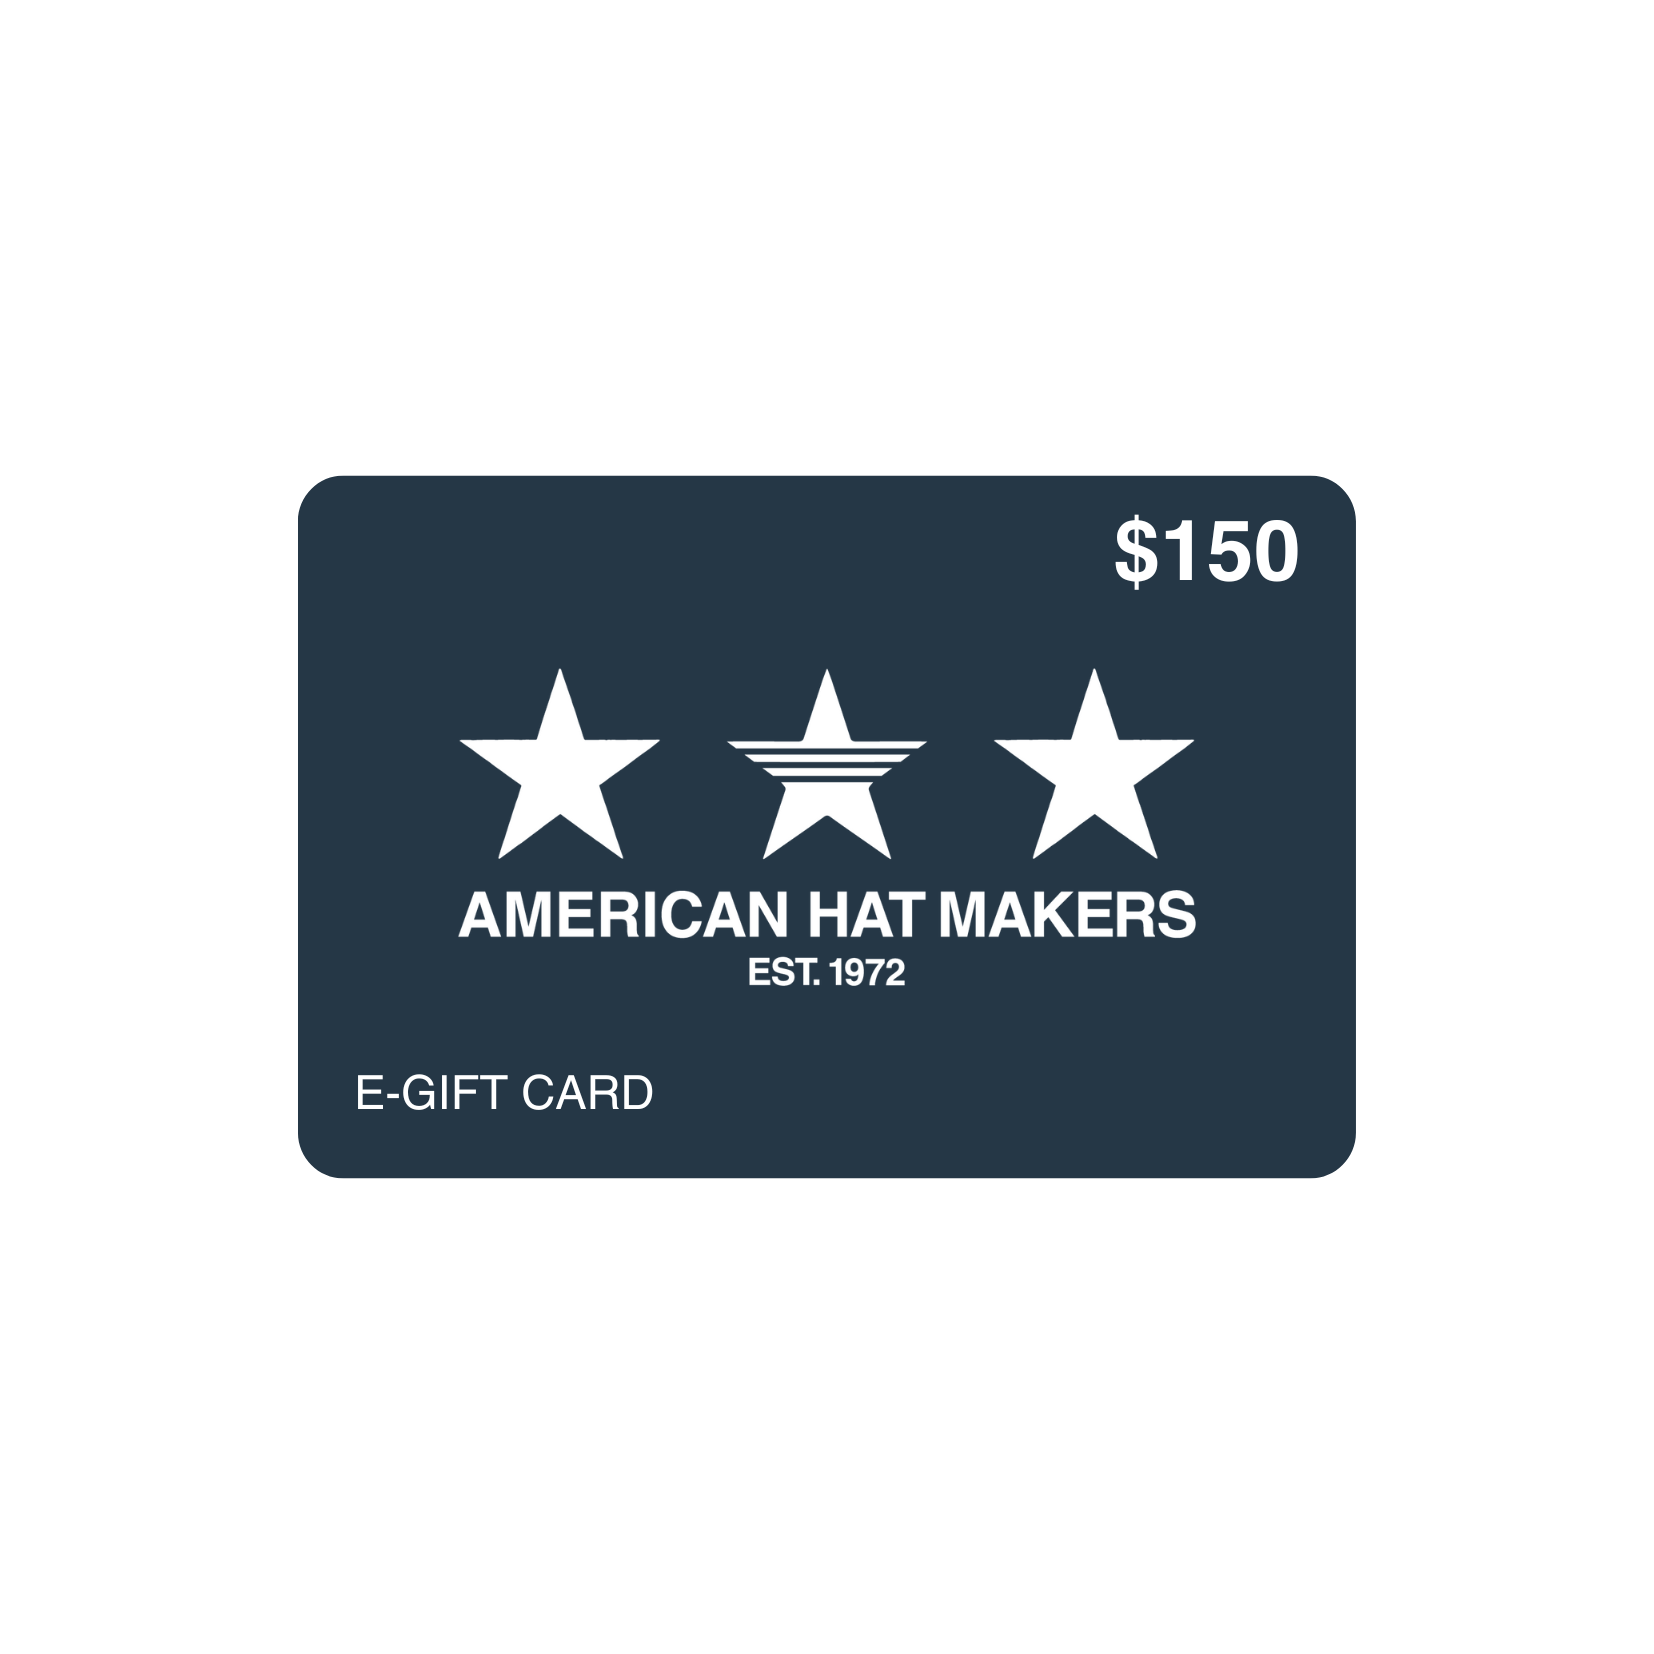 Electronic Gift Card amounting to $150 by American Hat Makers